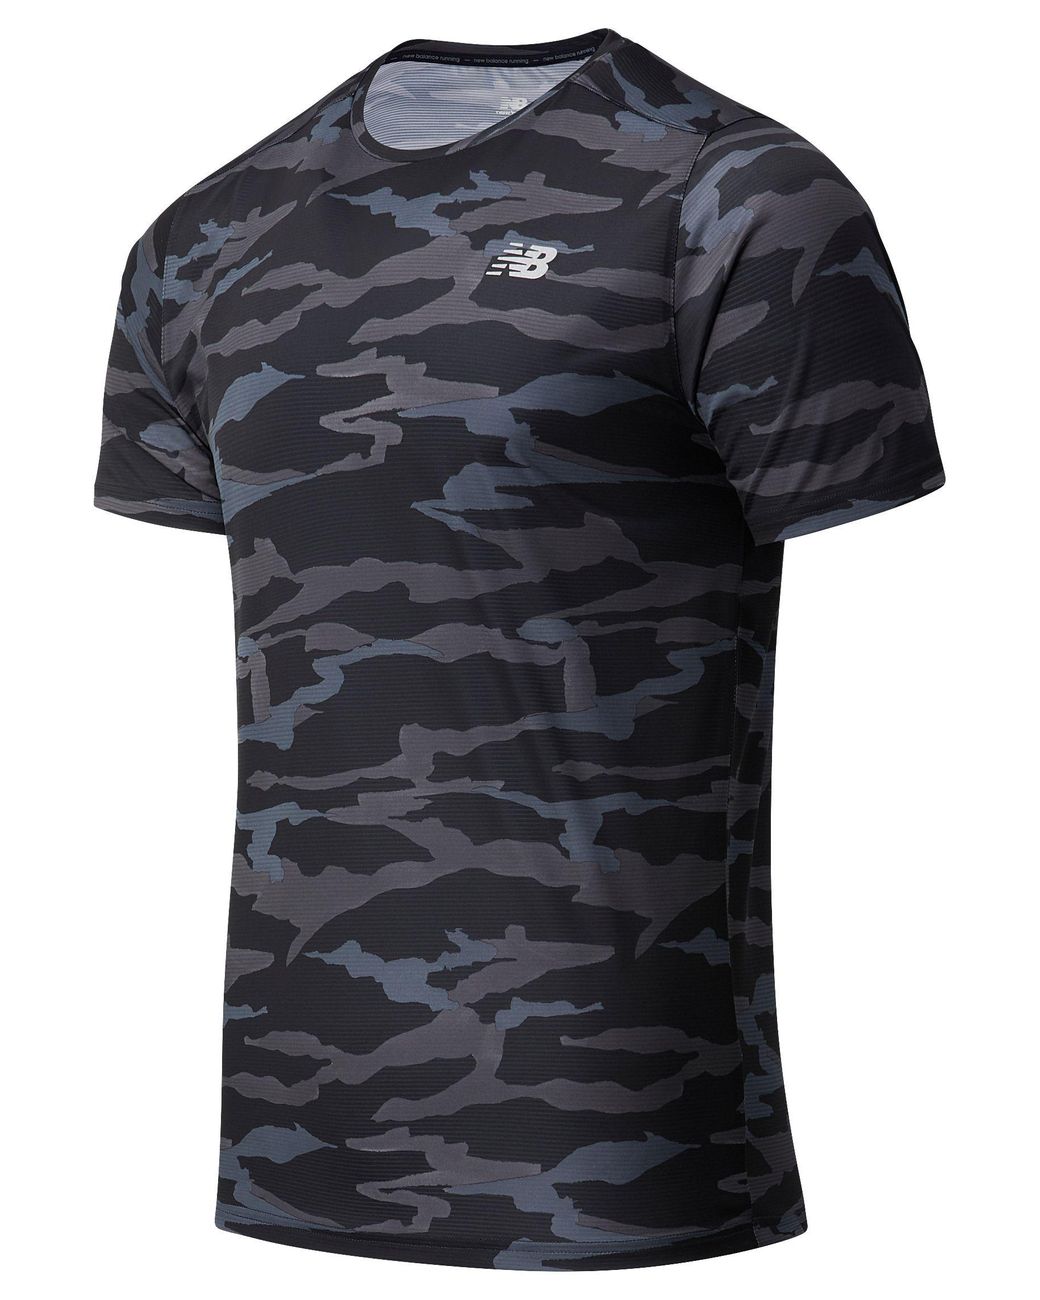 New Balance Printed Accelerate Short Sleeve in Blue for Men - Lyst